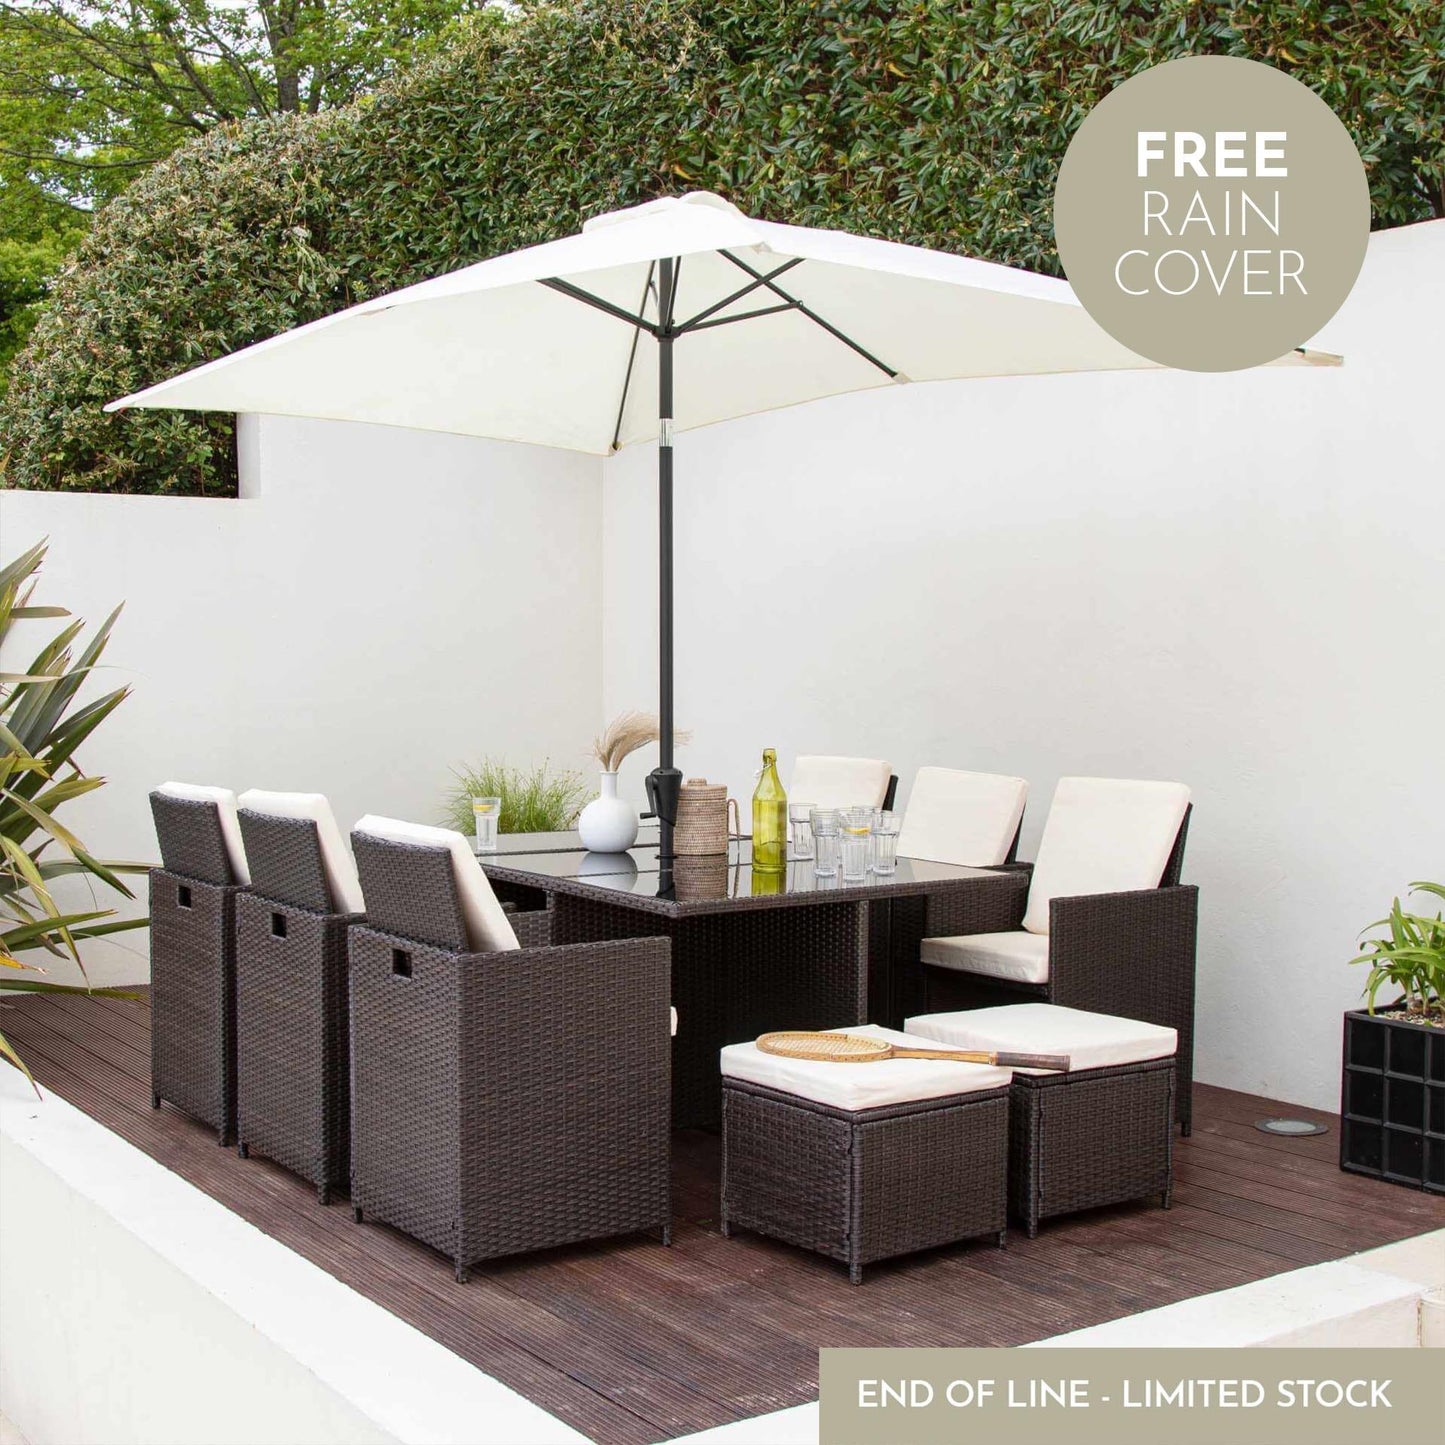 10 Seater Rattan Cube Outdoor Dining Set with Parasol - Mixed Brown Weave - Laura James